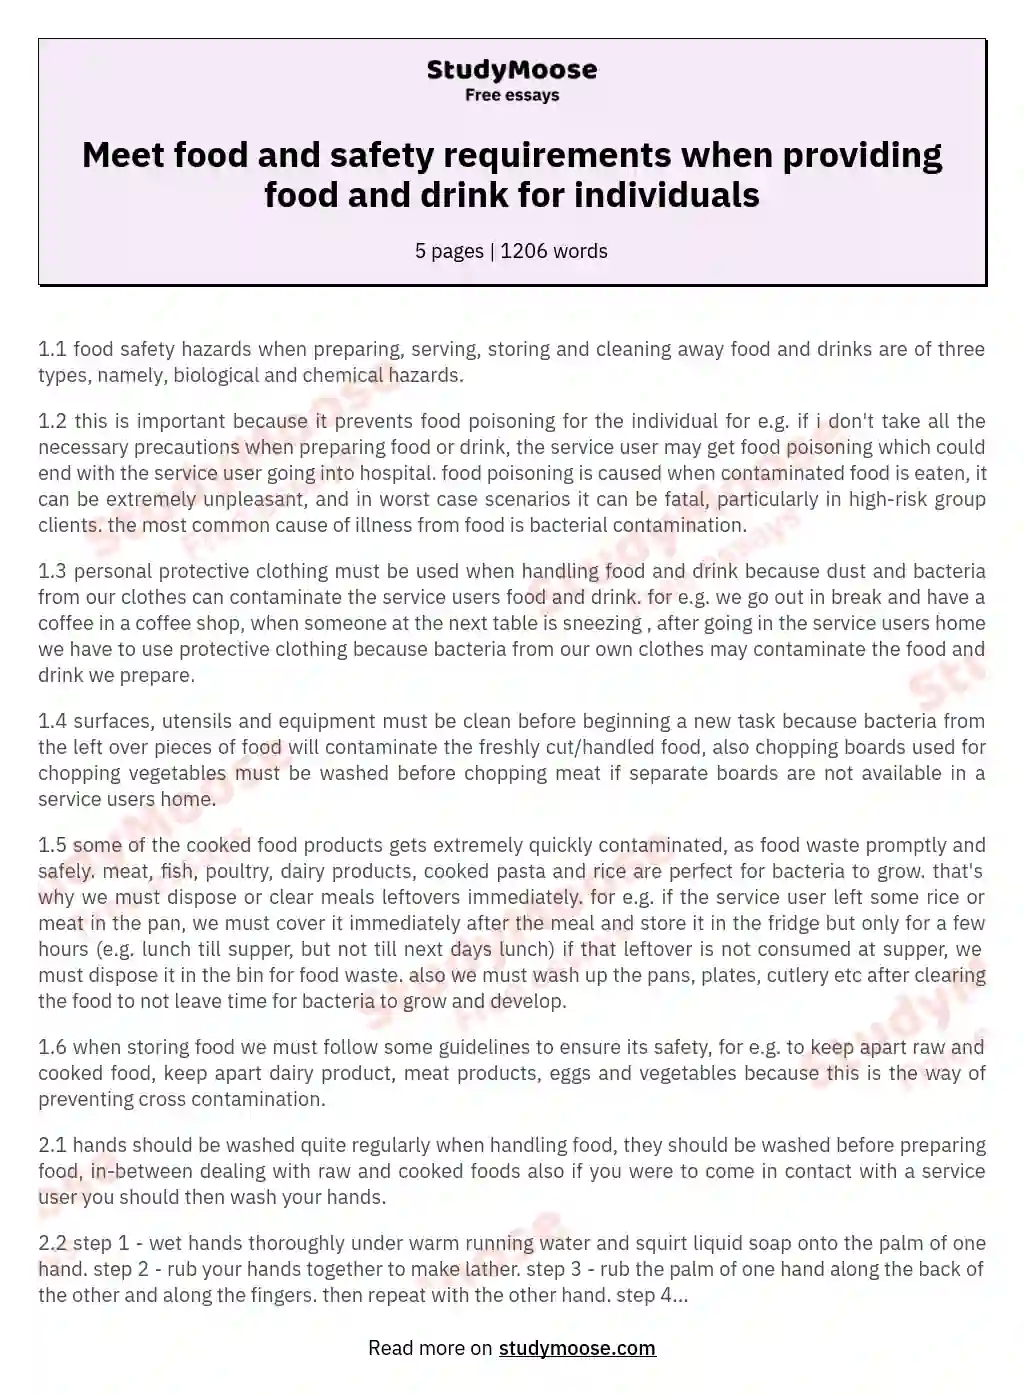 Meet food and safety requirements when providing food and drink for individuals essay